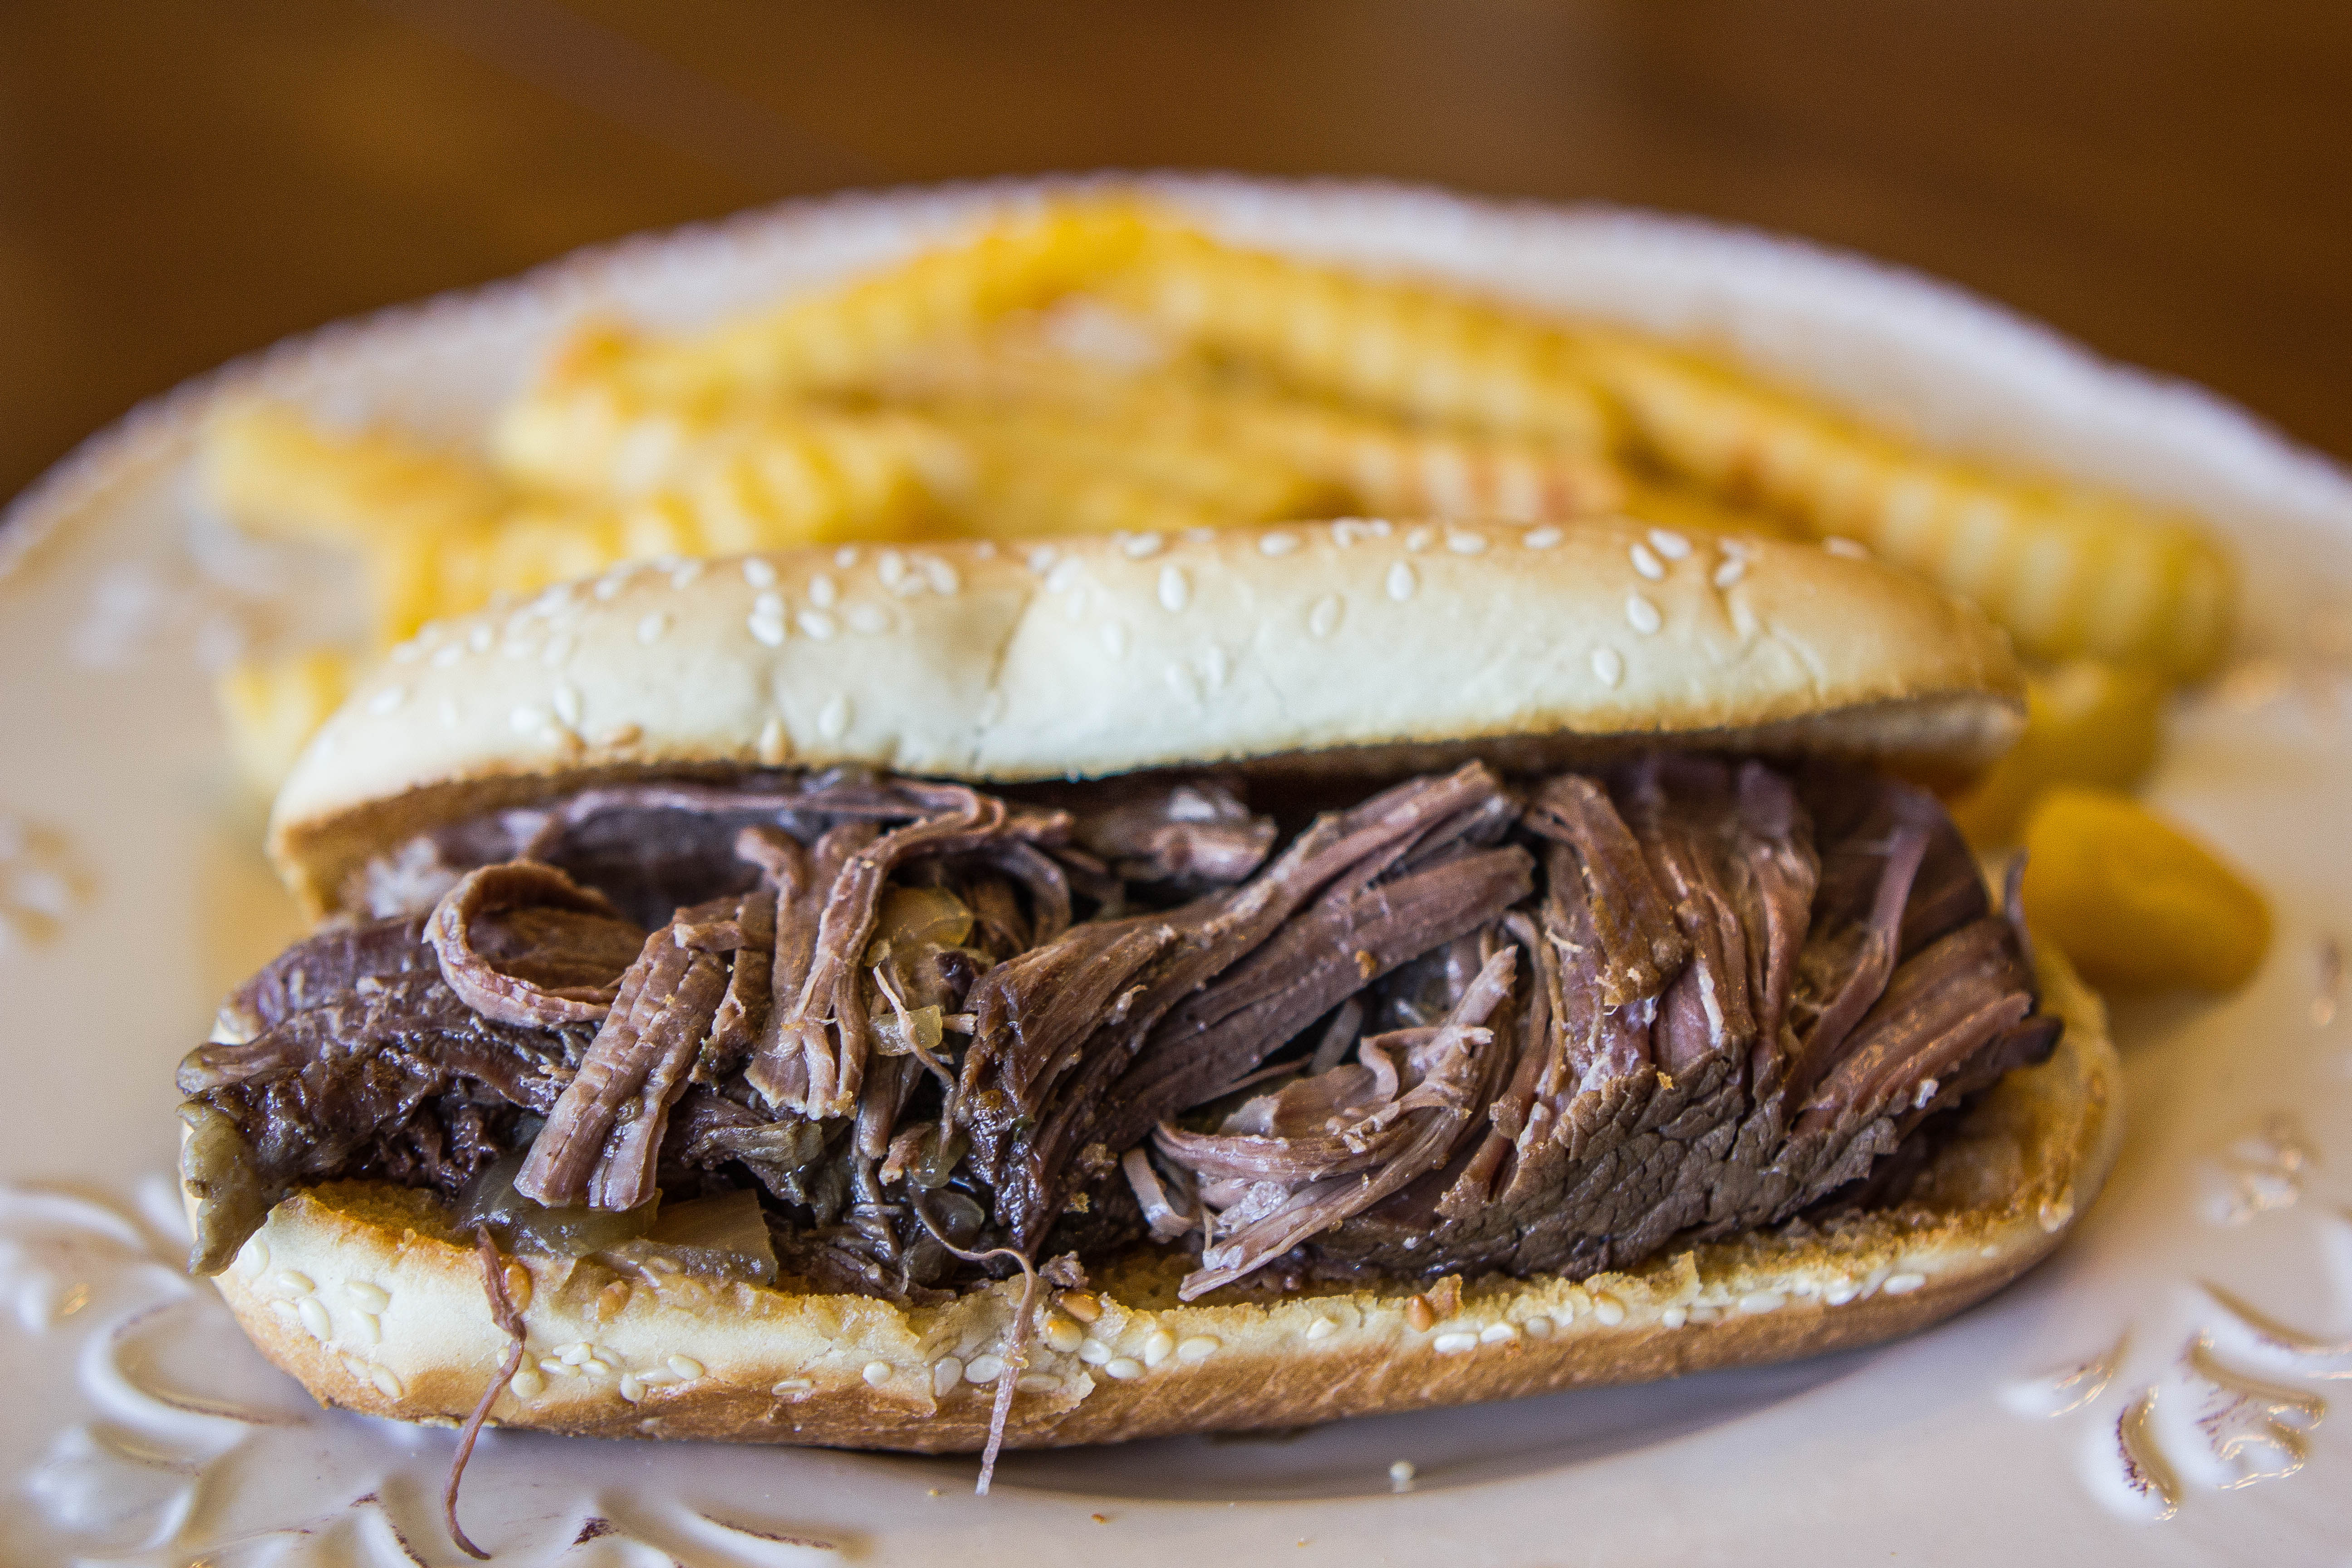 408-mouthwatering-french-dip-2.jpg